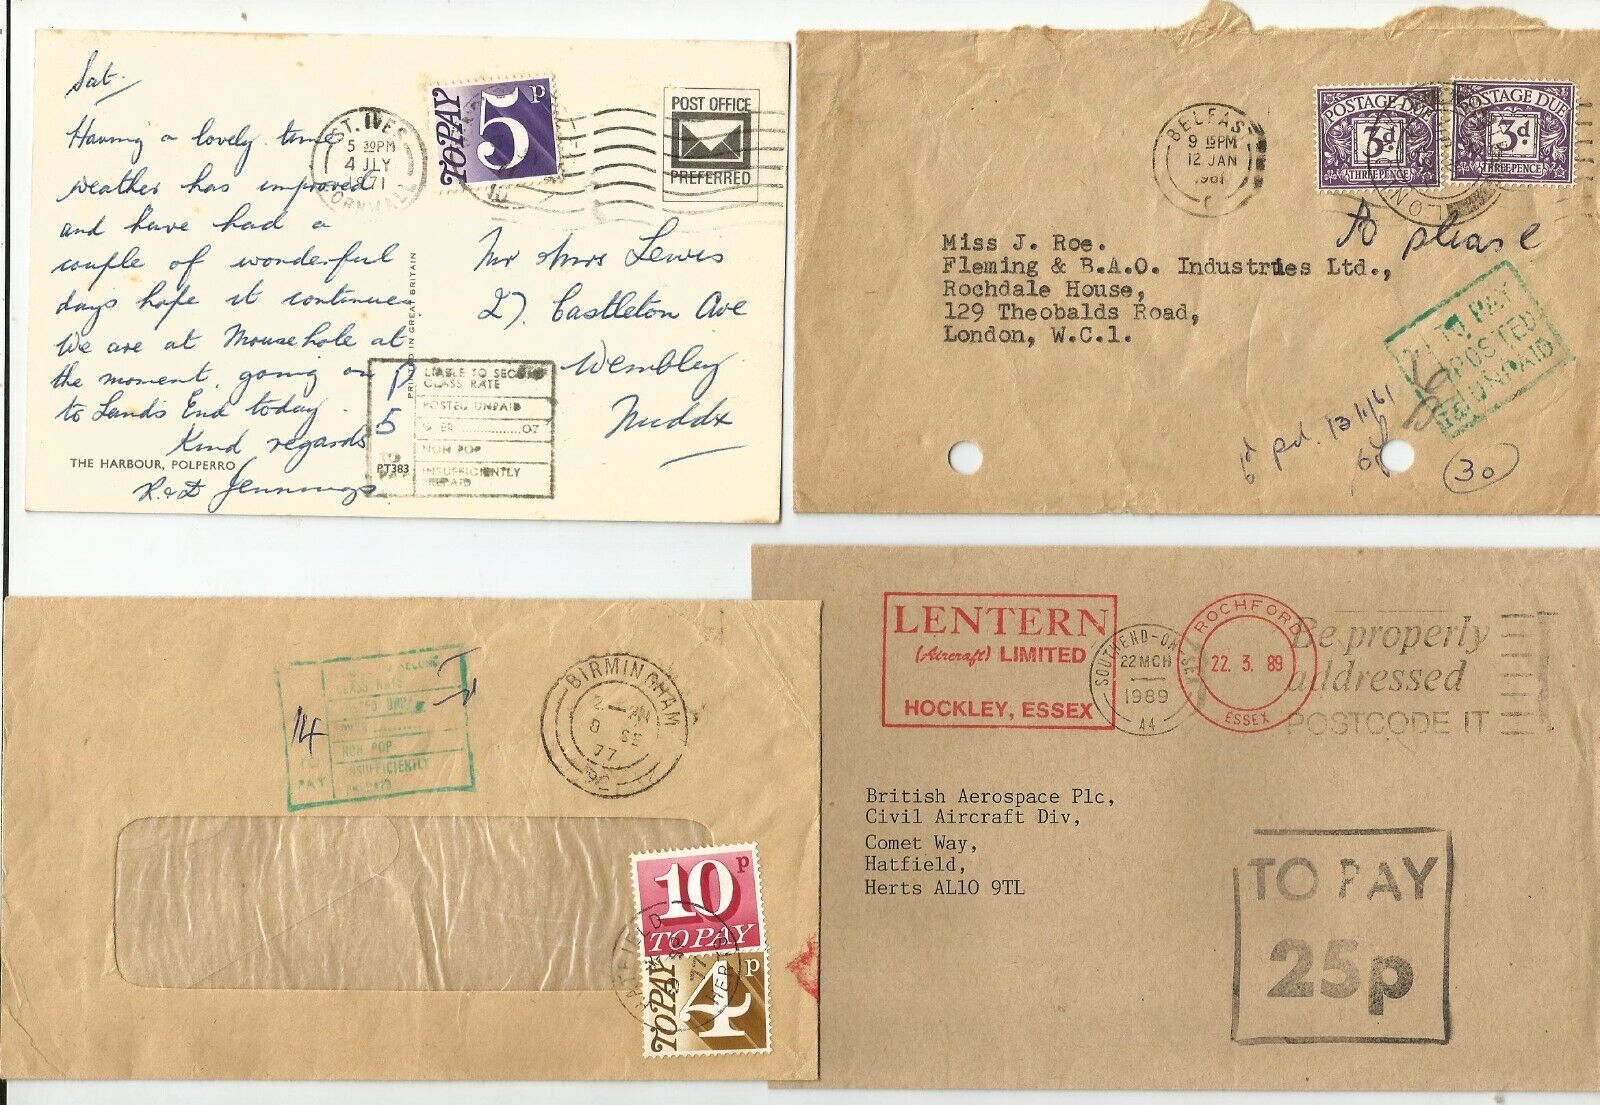 Gb 5 Covers 1961-89 Postage Due Stamps, Posted Unpaid, To Pay And Other Marks On